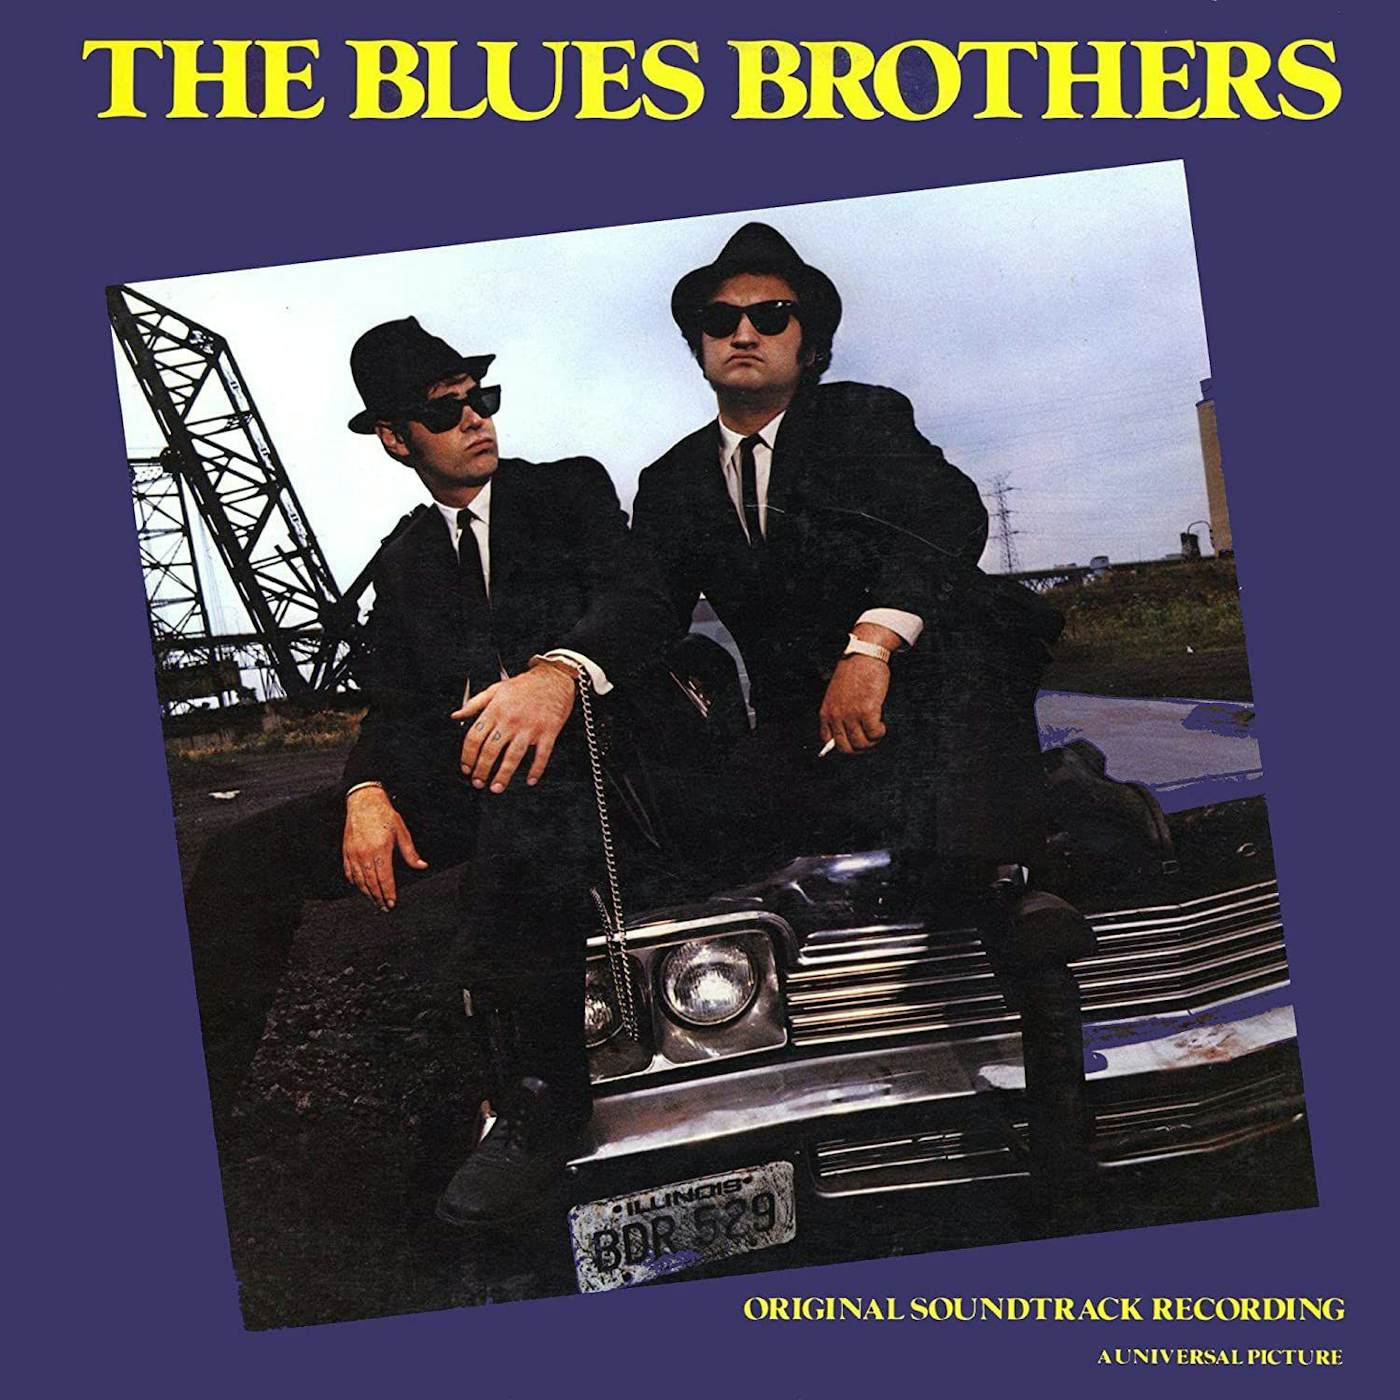 The The Blues & Brothers (Original Soundtrack Recording Translucent Limited Anniversary Edition) Vinyl Record